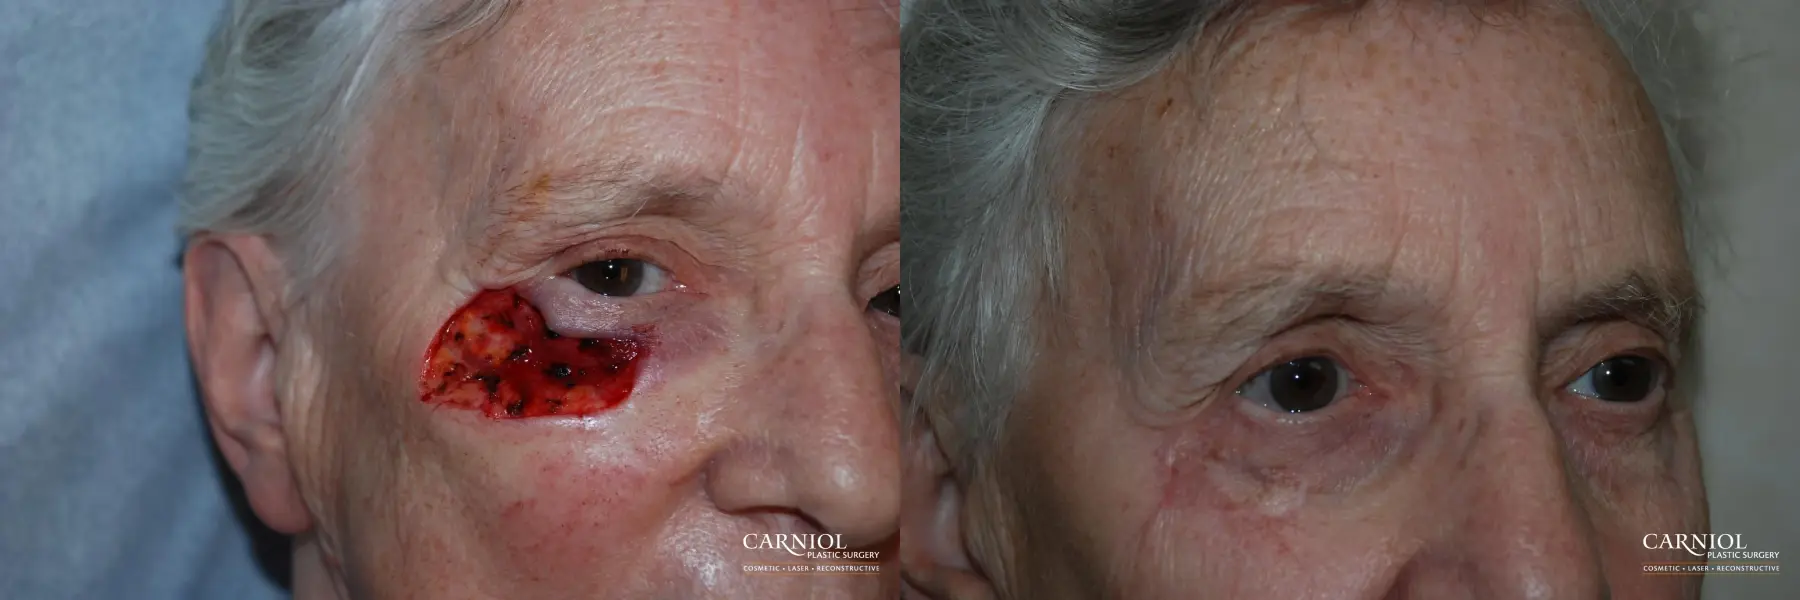 Skin Cancer Reconstruction - Face: Patient 5 - Before and After 1